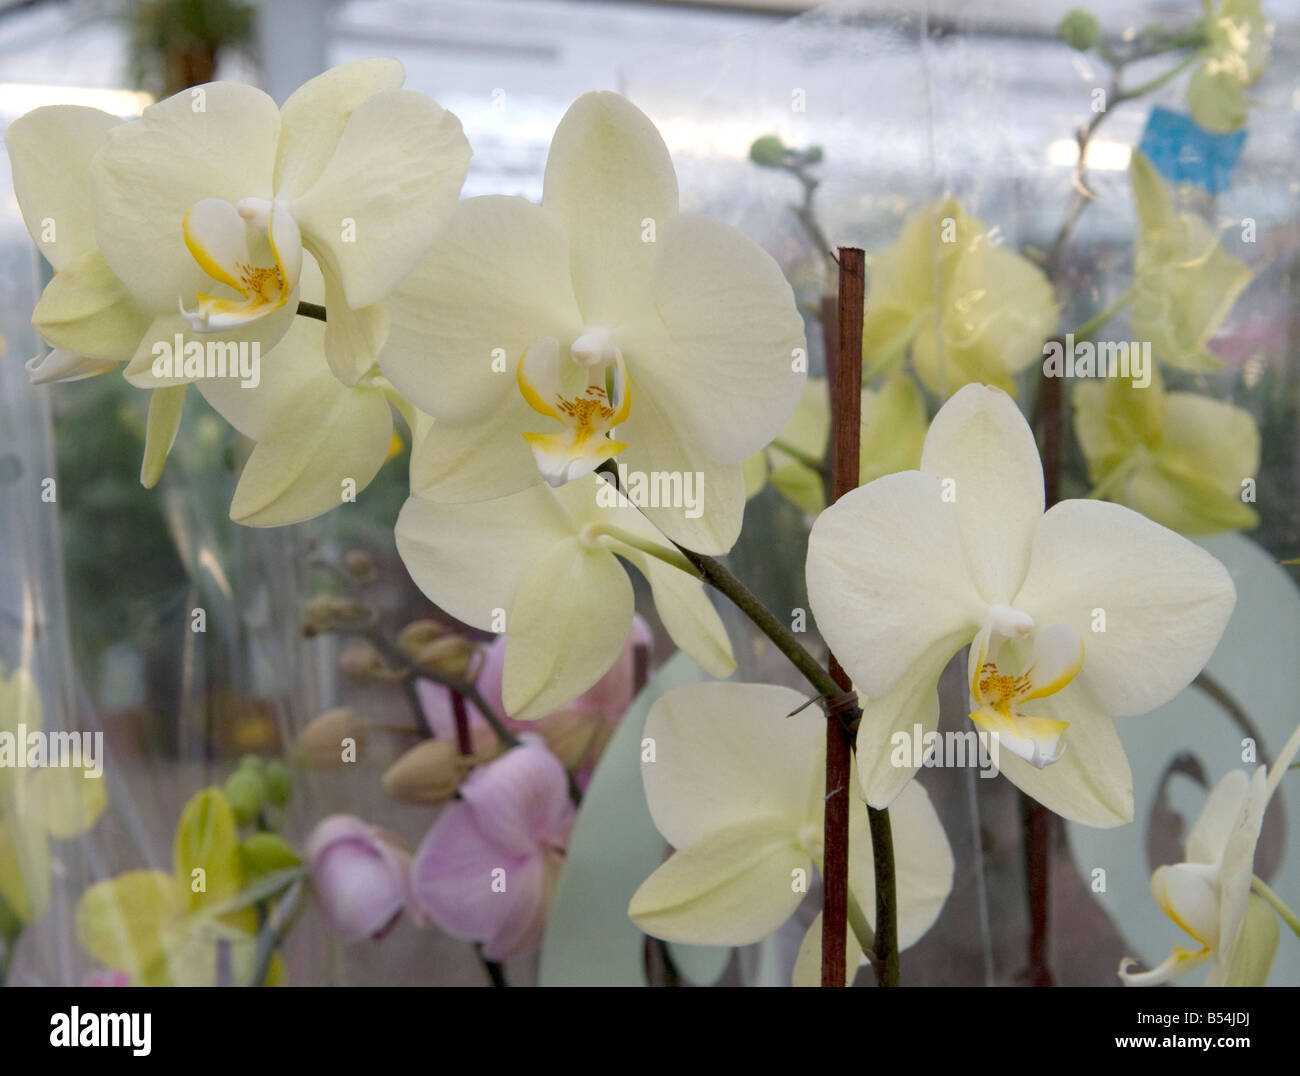 Ascocentrum x Vanda orchid in white with yellow centre stamen in full bloom. Stock Photo